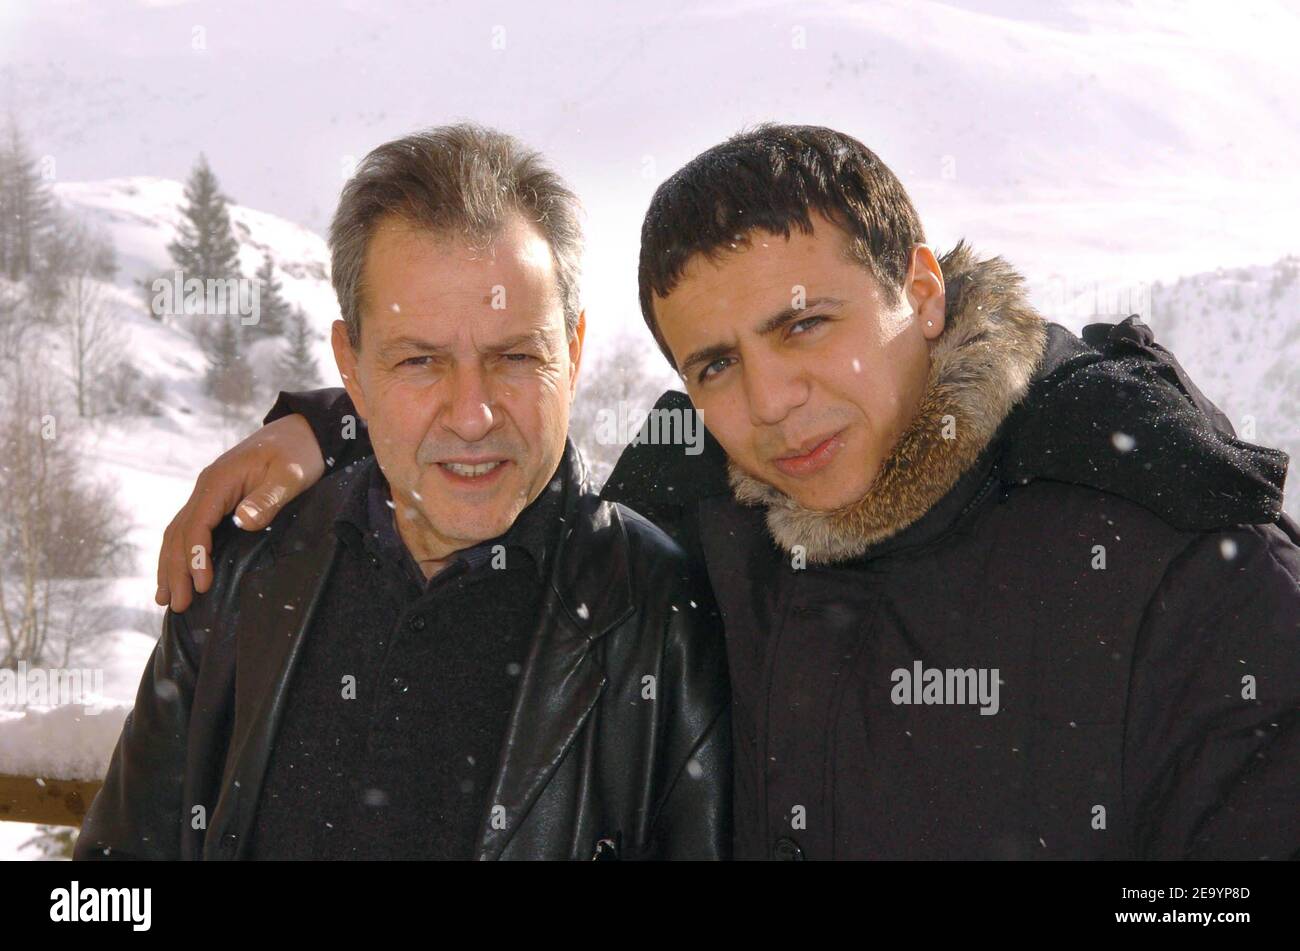 French rai singer and actor Faudel poses at a photocall for his movie 'Bab El Web' directed by Merzak Allouache (l) during the 'Festival du Film de Comedie' in l'Alpe d'Huez, France on January 19, 2005. Photo by Bruno Klein/ABACA Stock Photo